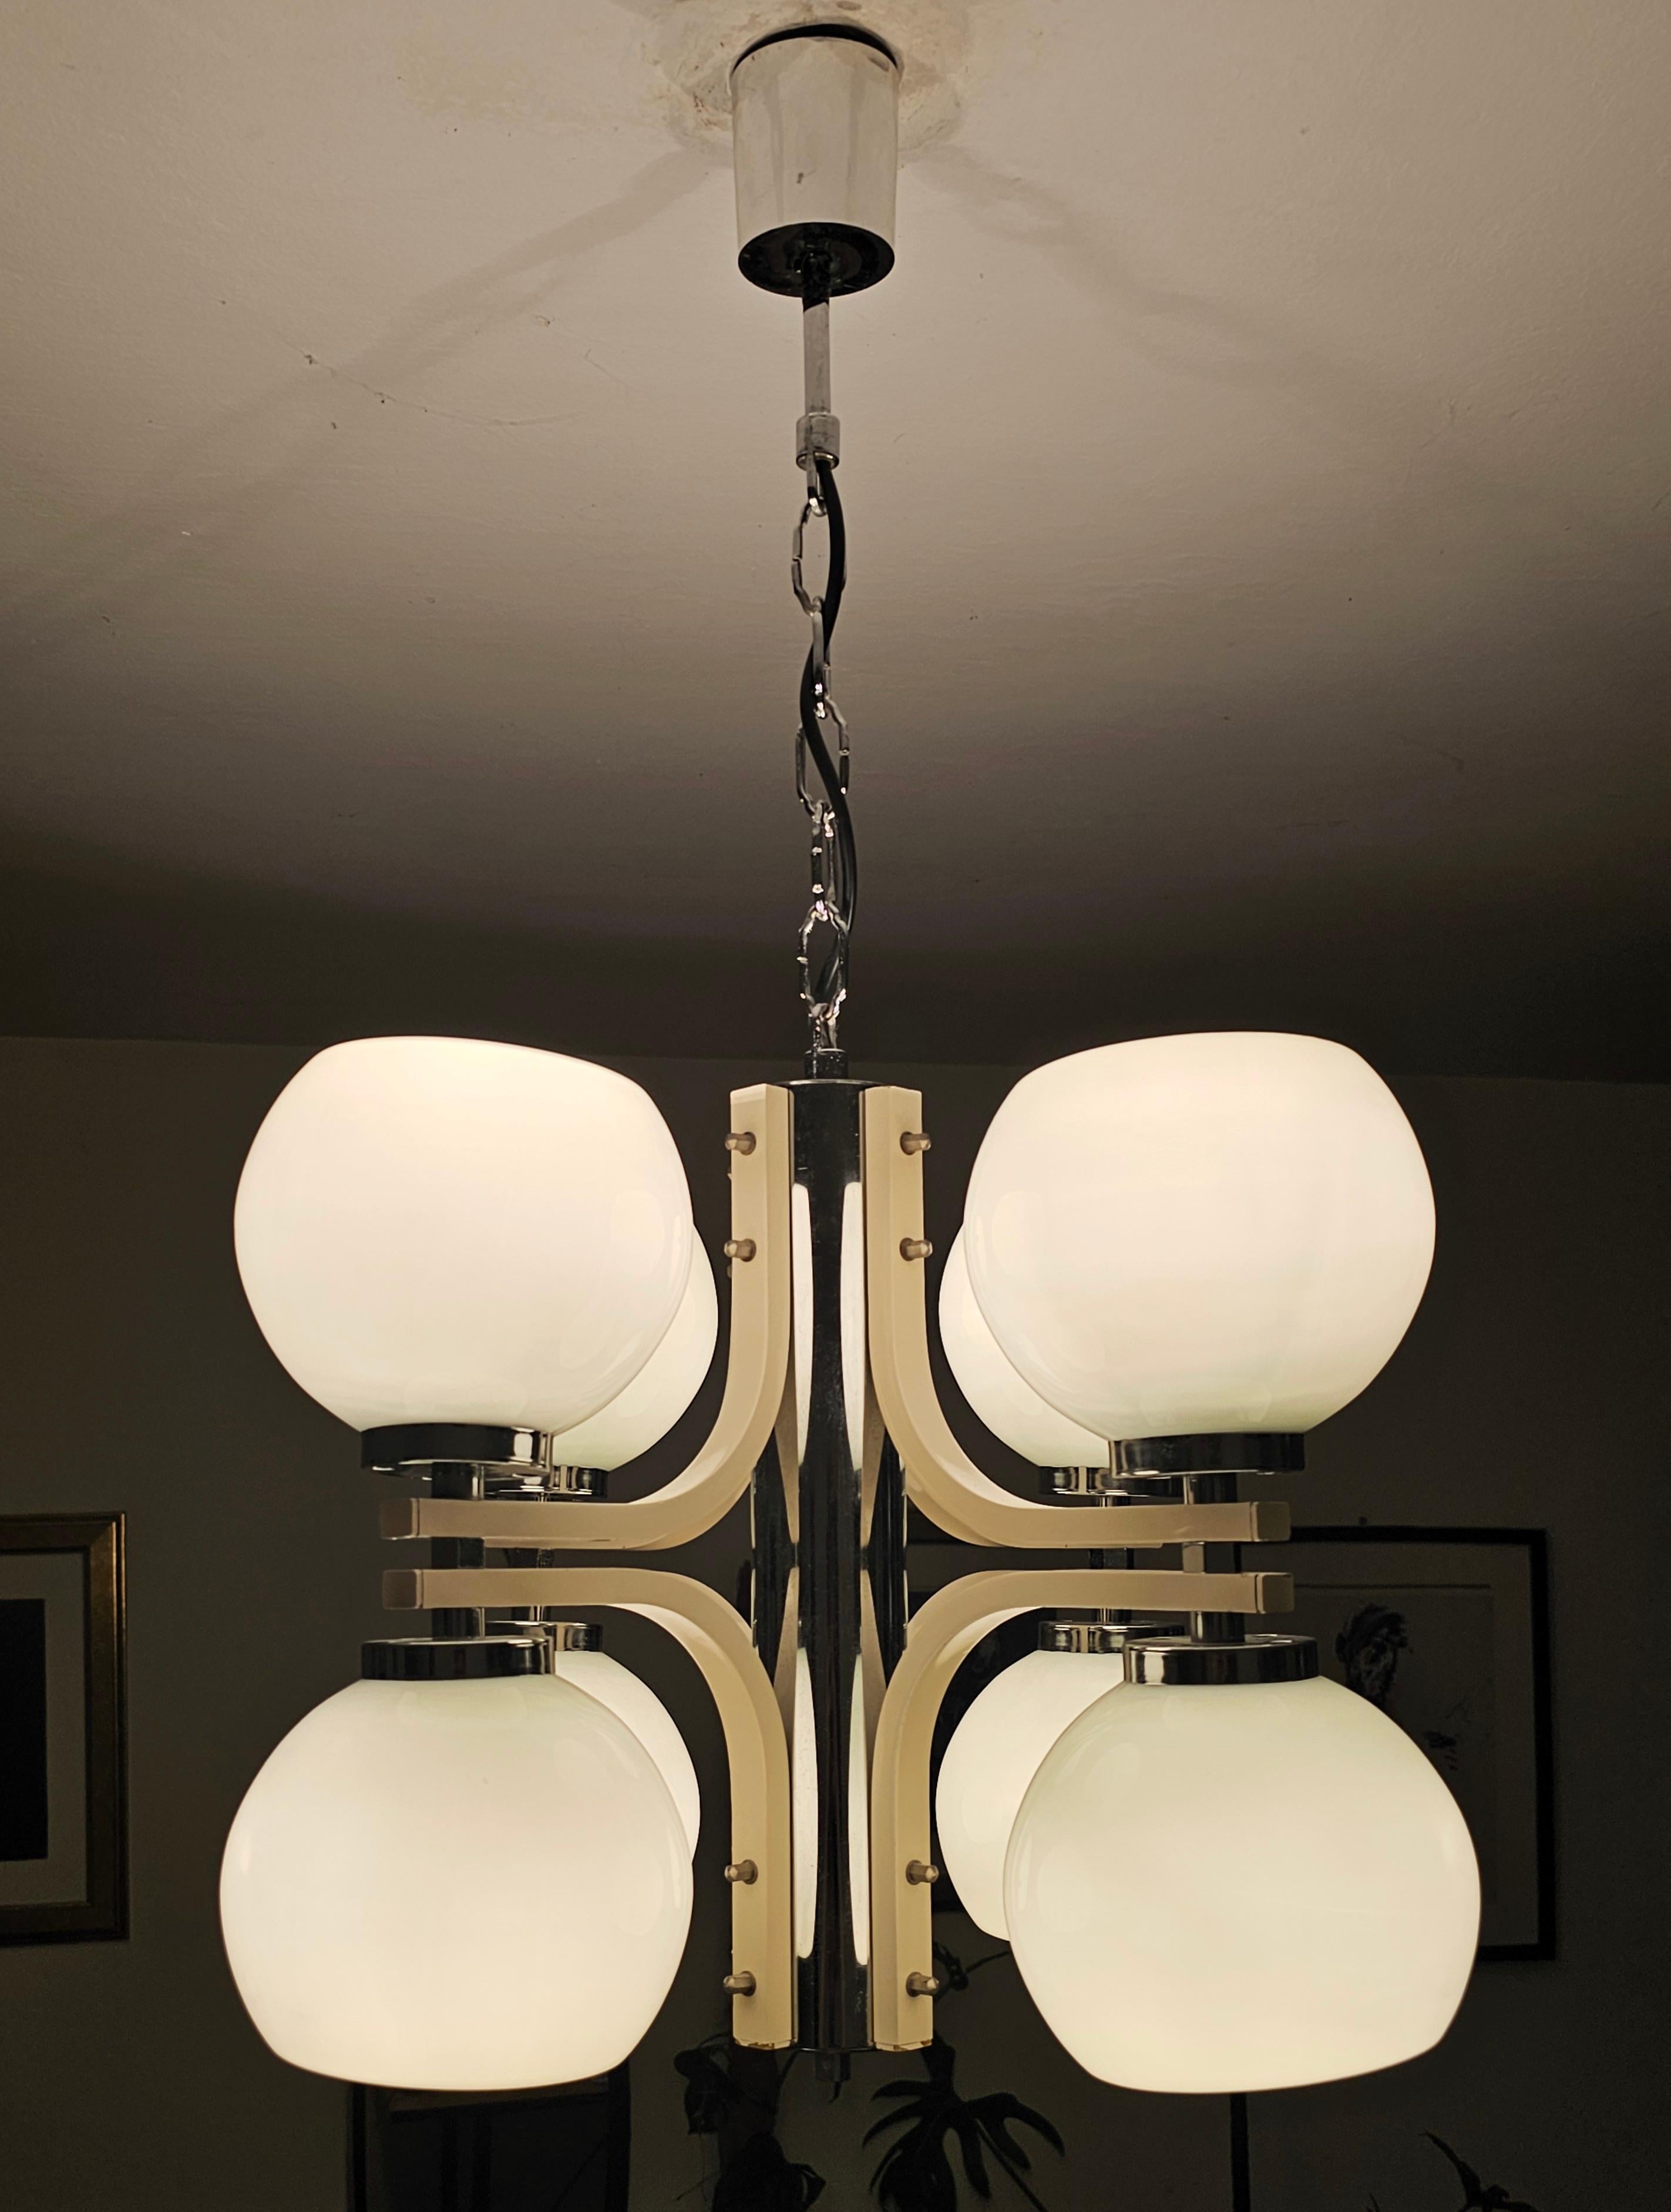 Space Age 8-Light Chandelier with While Glass Shades, Yugoslavia 1970s For Sale 6